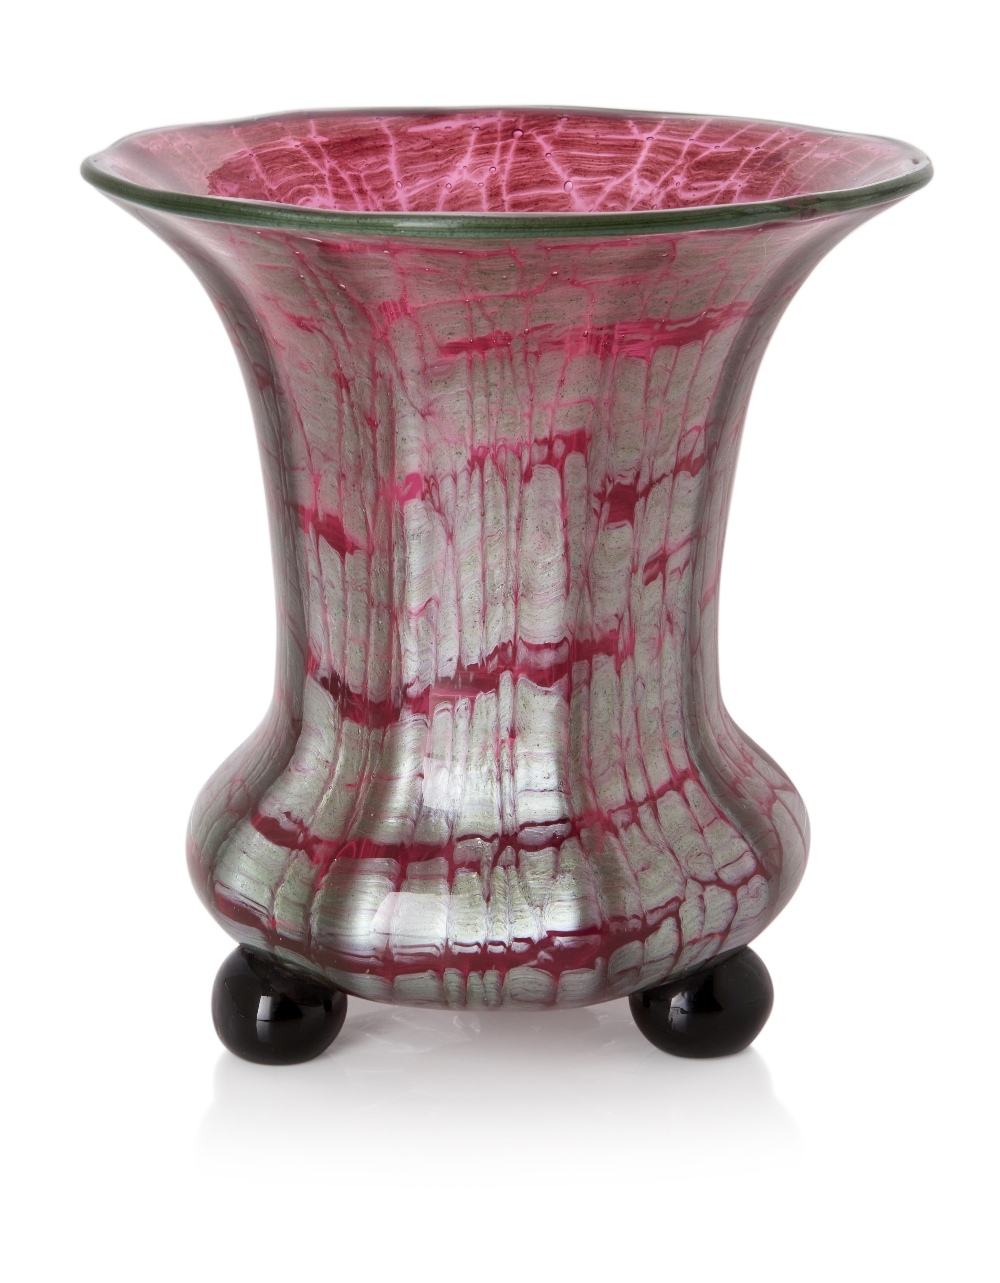 Loetz, Ausfuehrung 134 footed vase, circa 1914, Pink and silver green glass cased in clear glass,